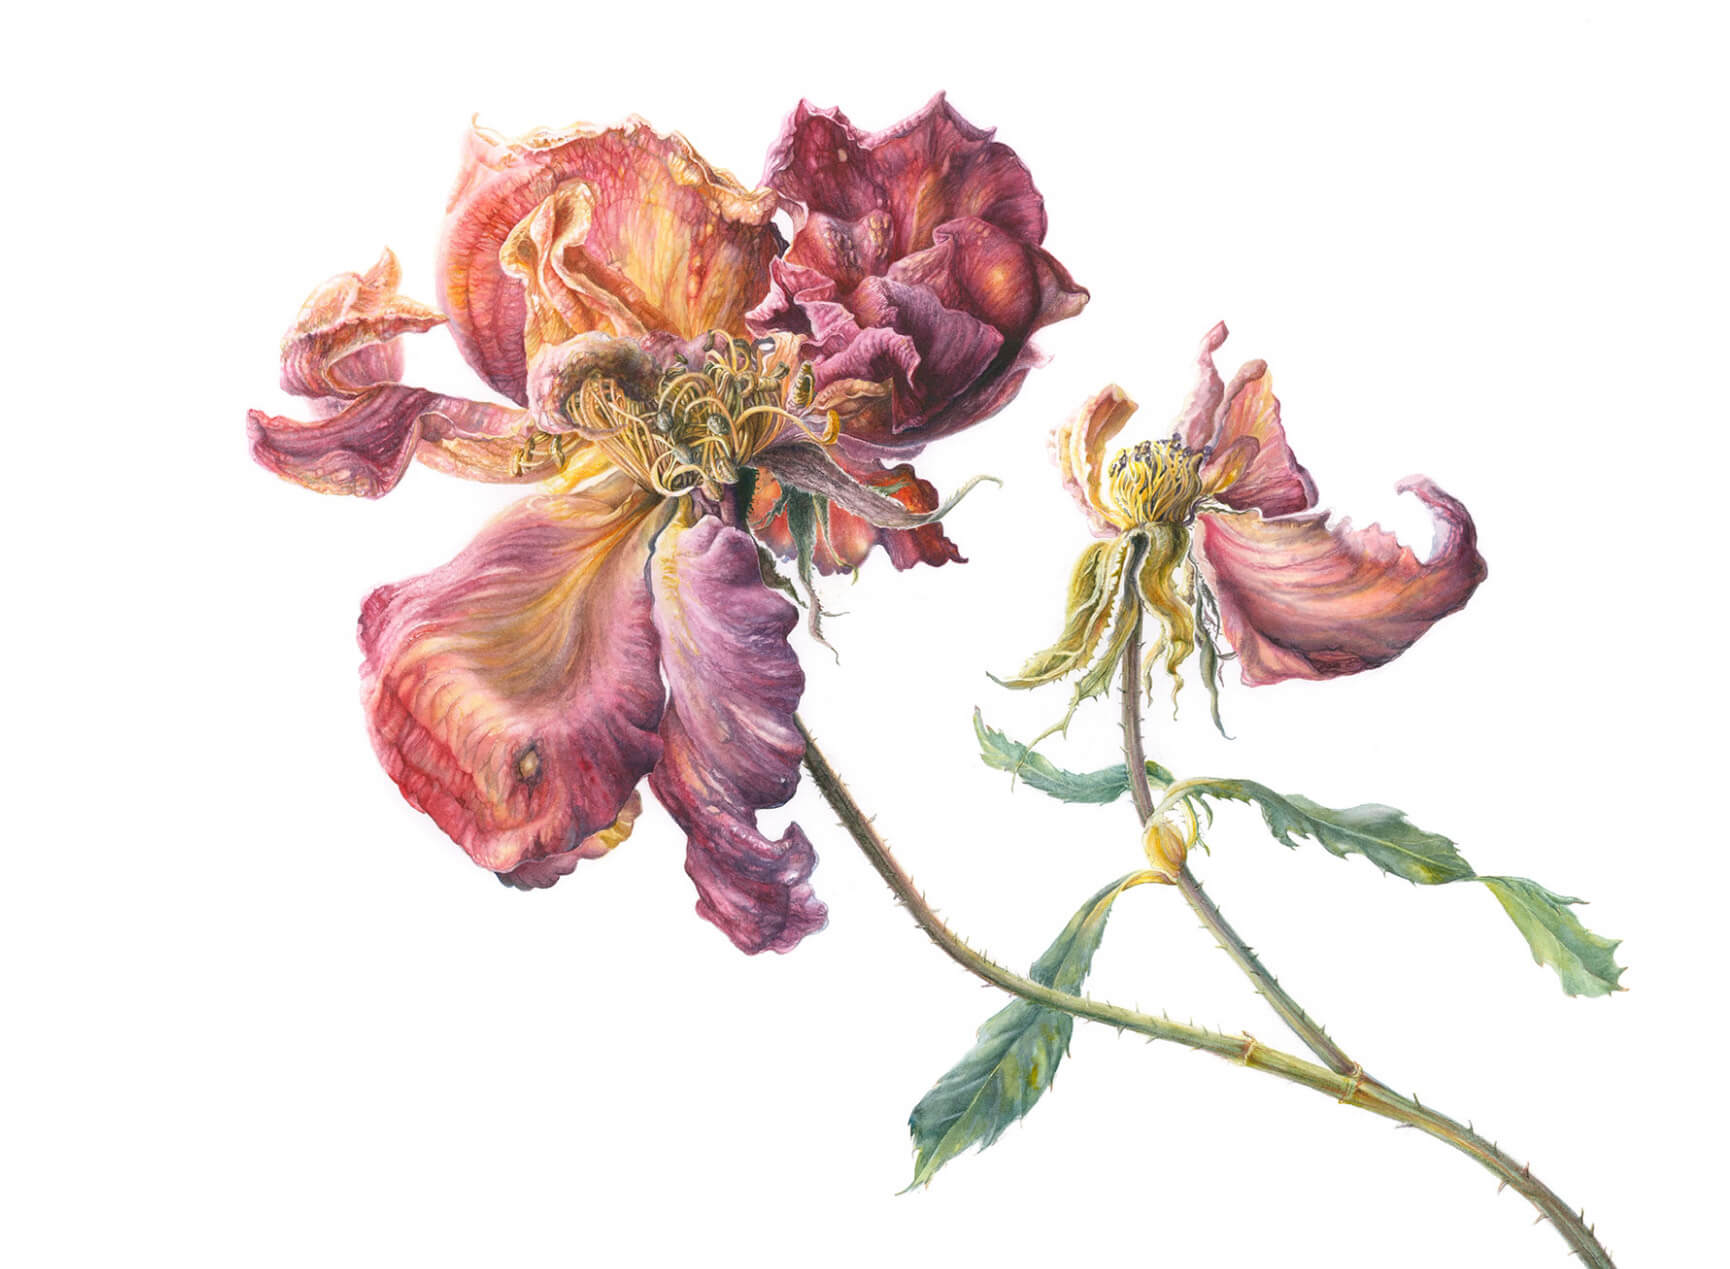 Botanical illustration by botanical artists Mary Dillon in red and purple tones of a rose with falling petals.